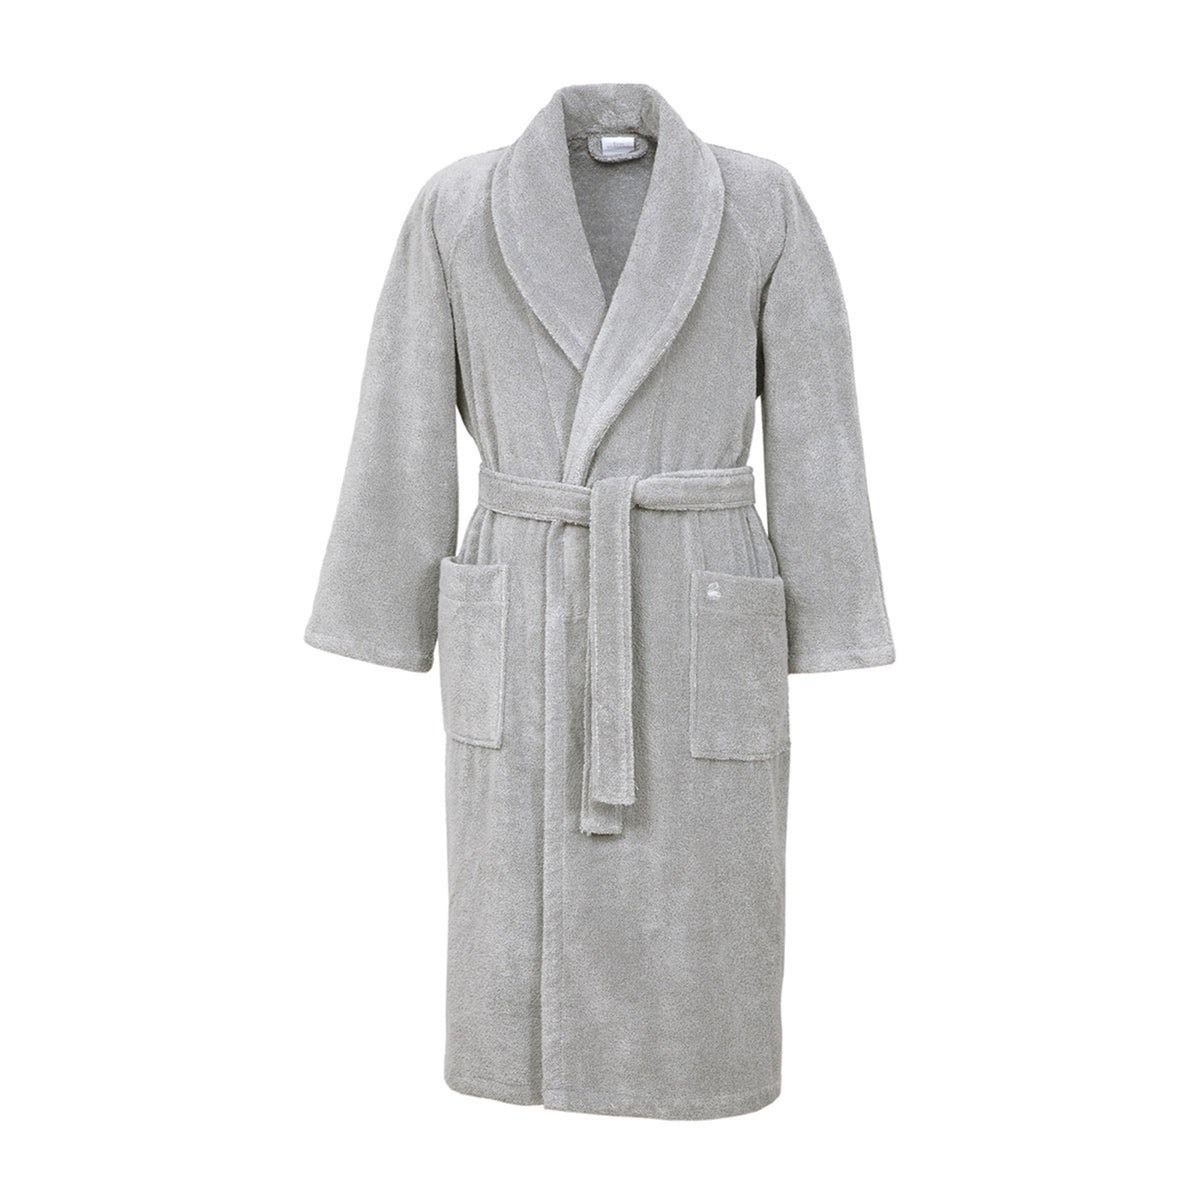 Front View of Yves Delorme Etoile Bath Robe in Color Platine